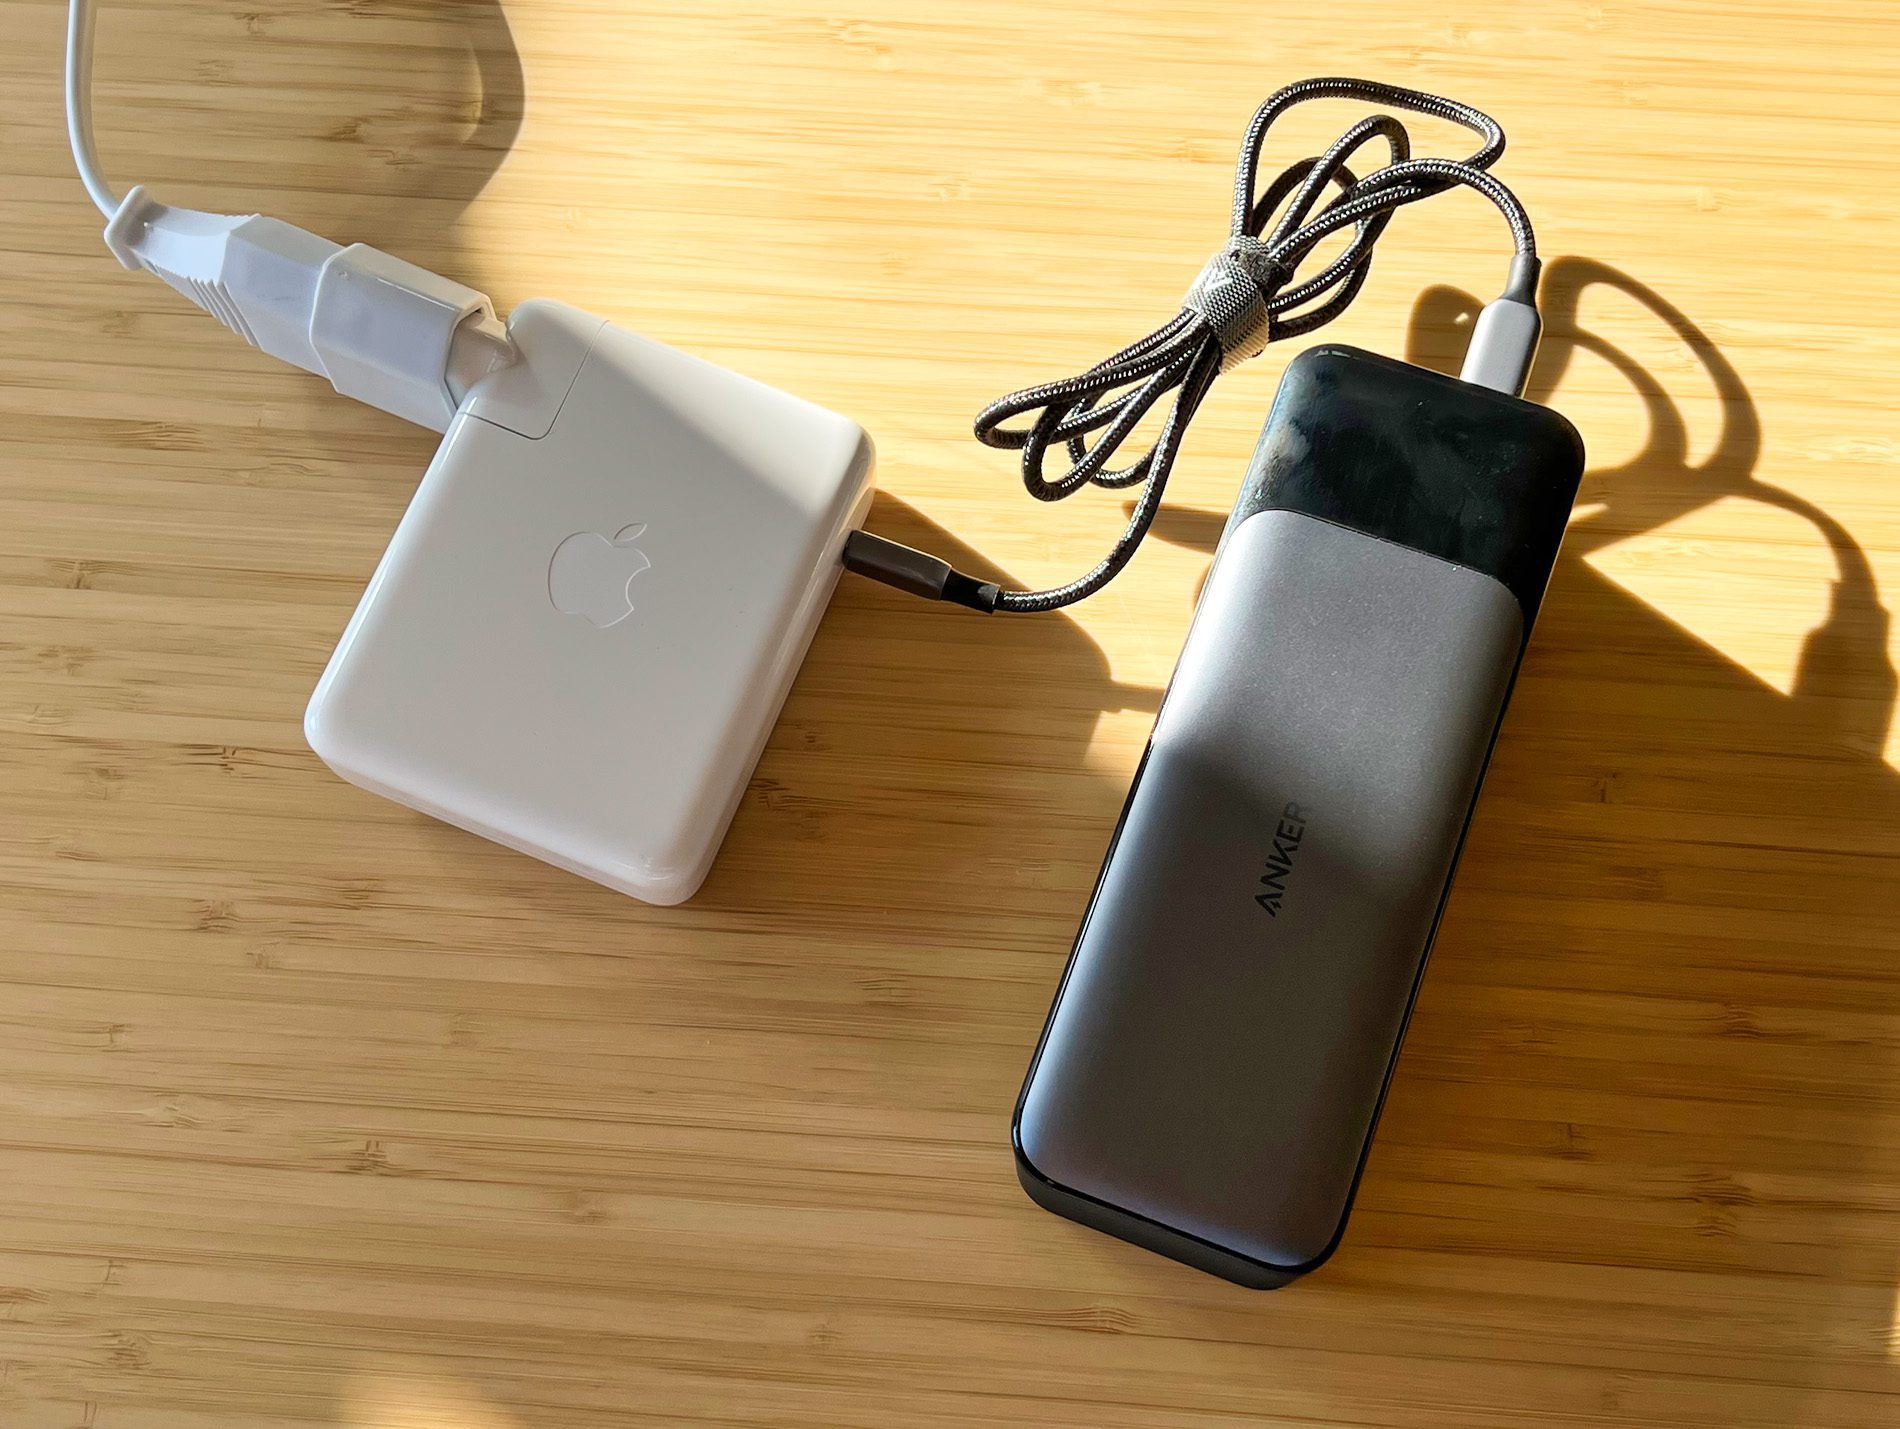 In my test, I charge the power bank with the most powerful power supply that Apple has to offer: the 140 watt power supply.